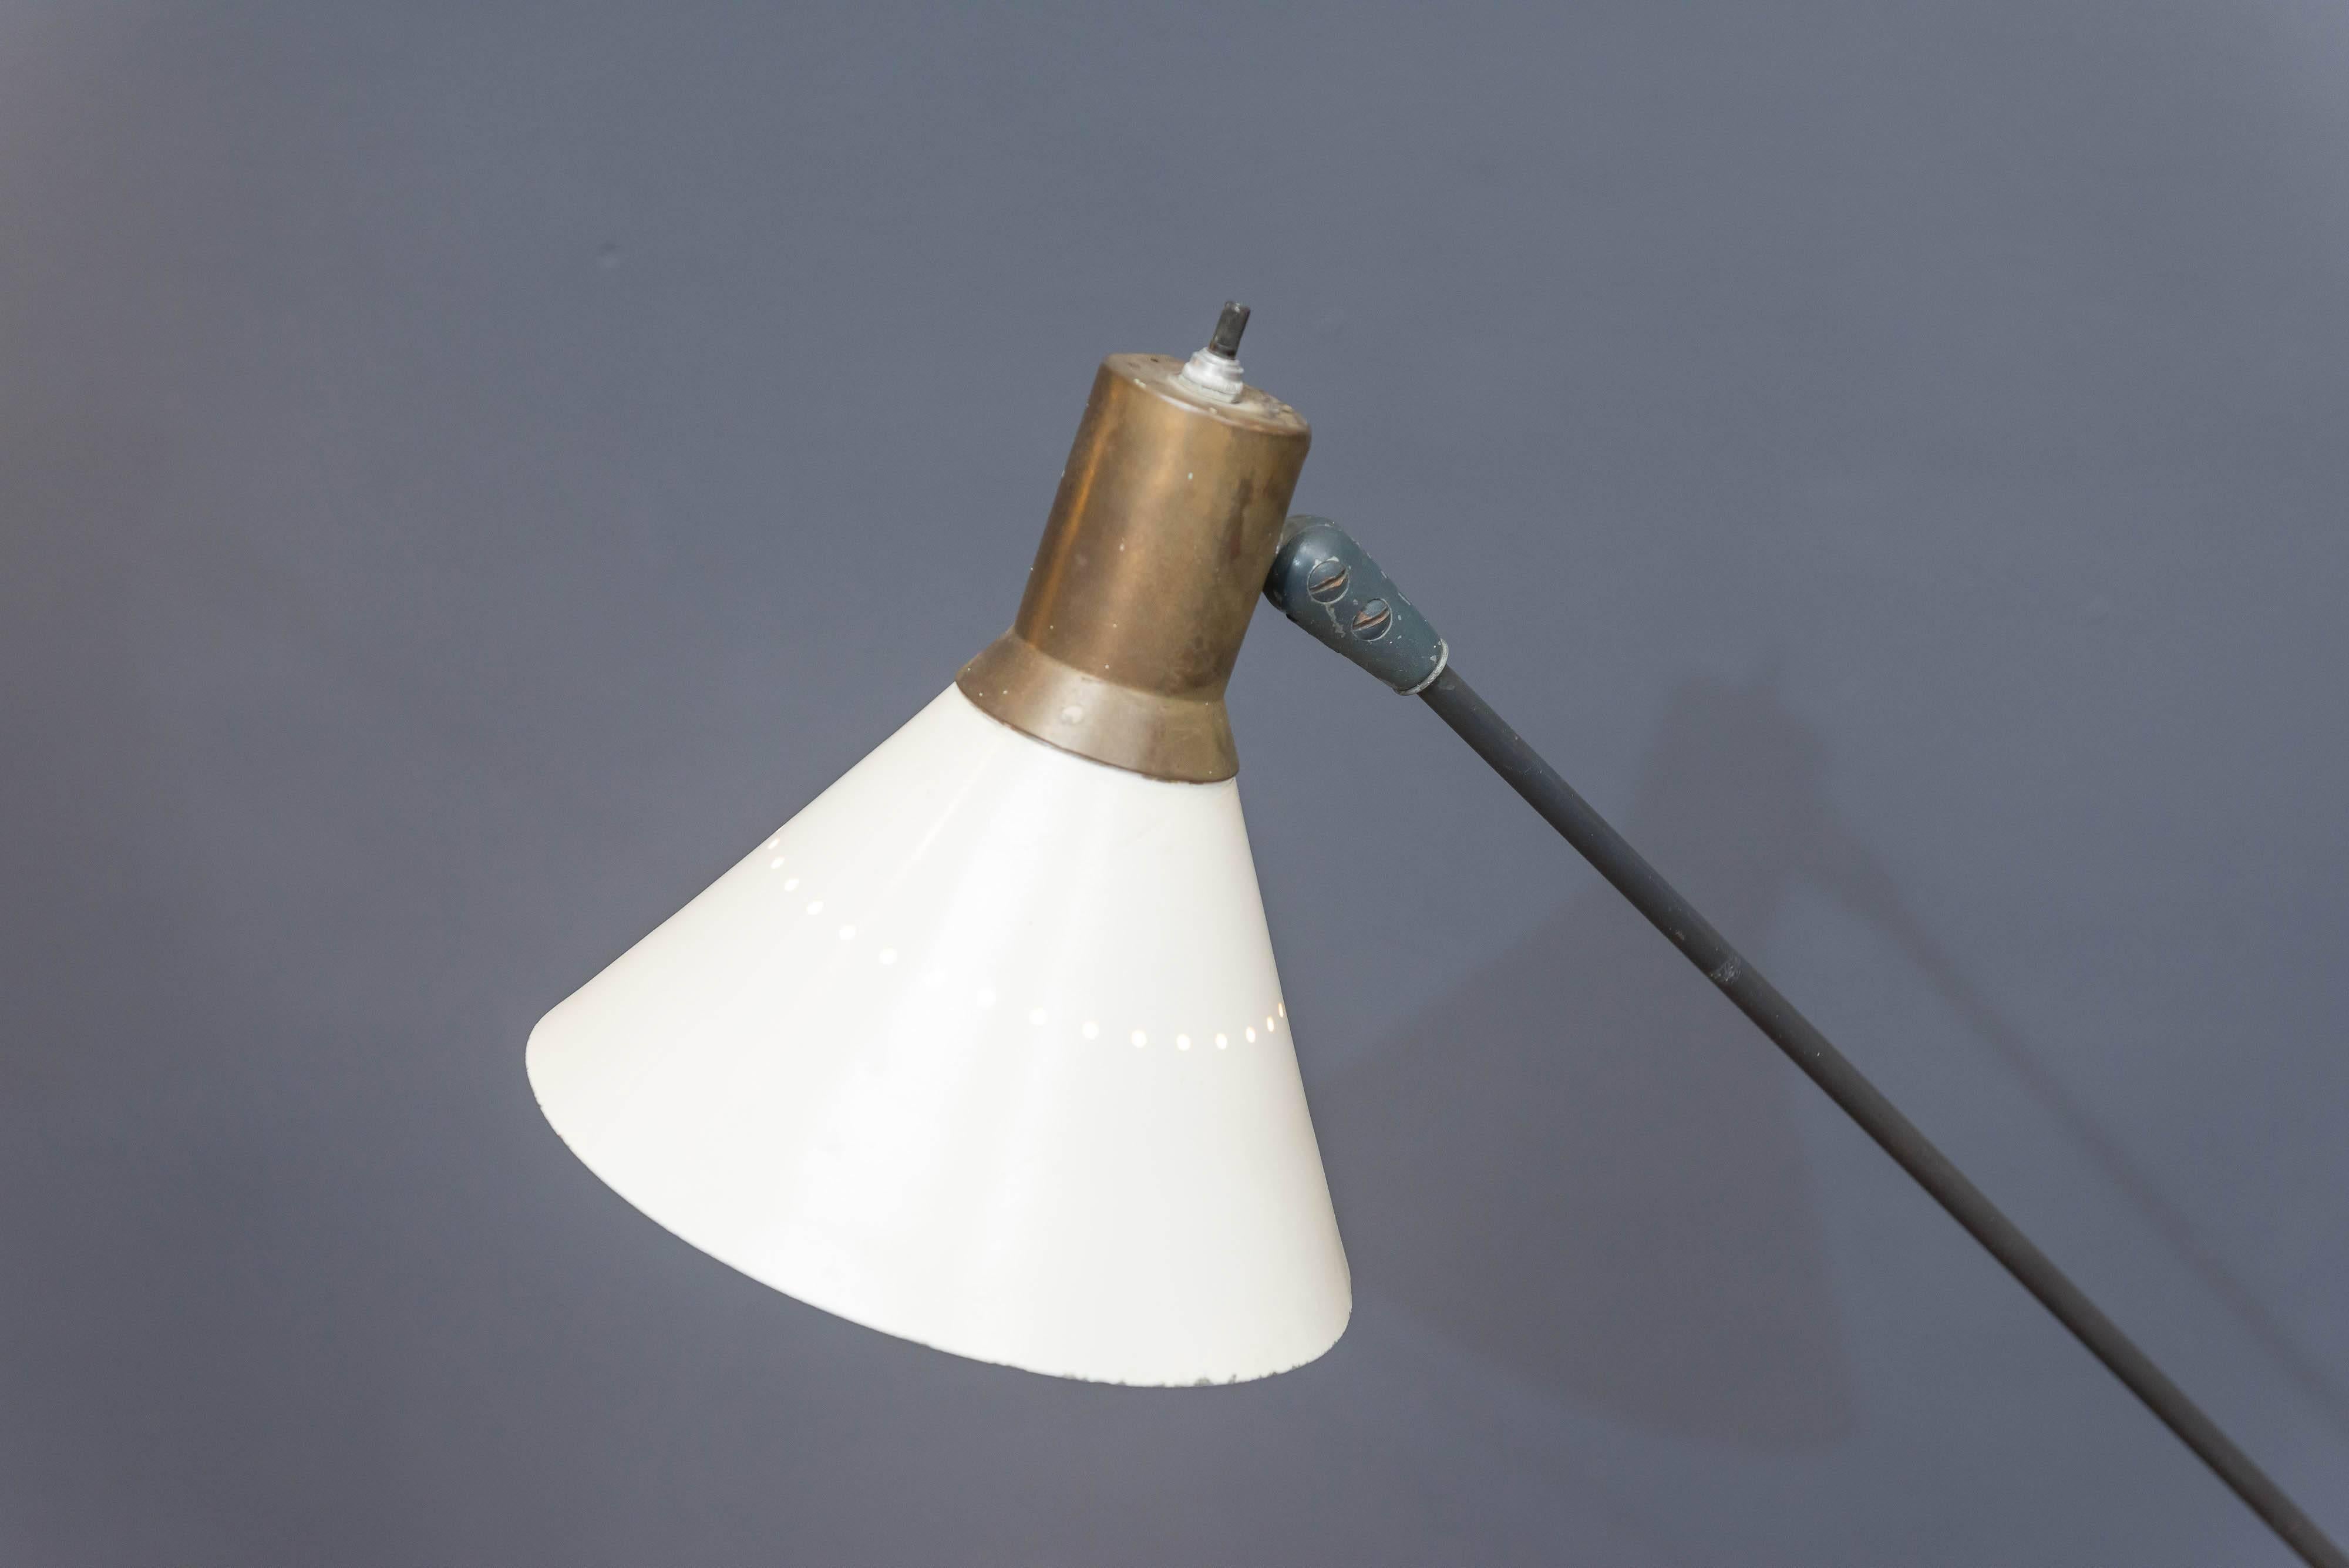 Designed by Gilbert Watrous for the Heifetz Lighting Company and one of the ten winners of the low cost lighting competition of 1951. Retained by the museum of modern art for there permanent collection. 
Tripod base supports a single adjustable arm